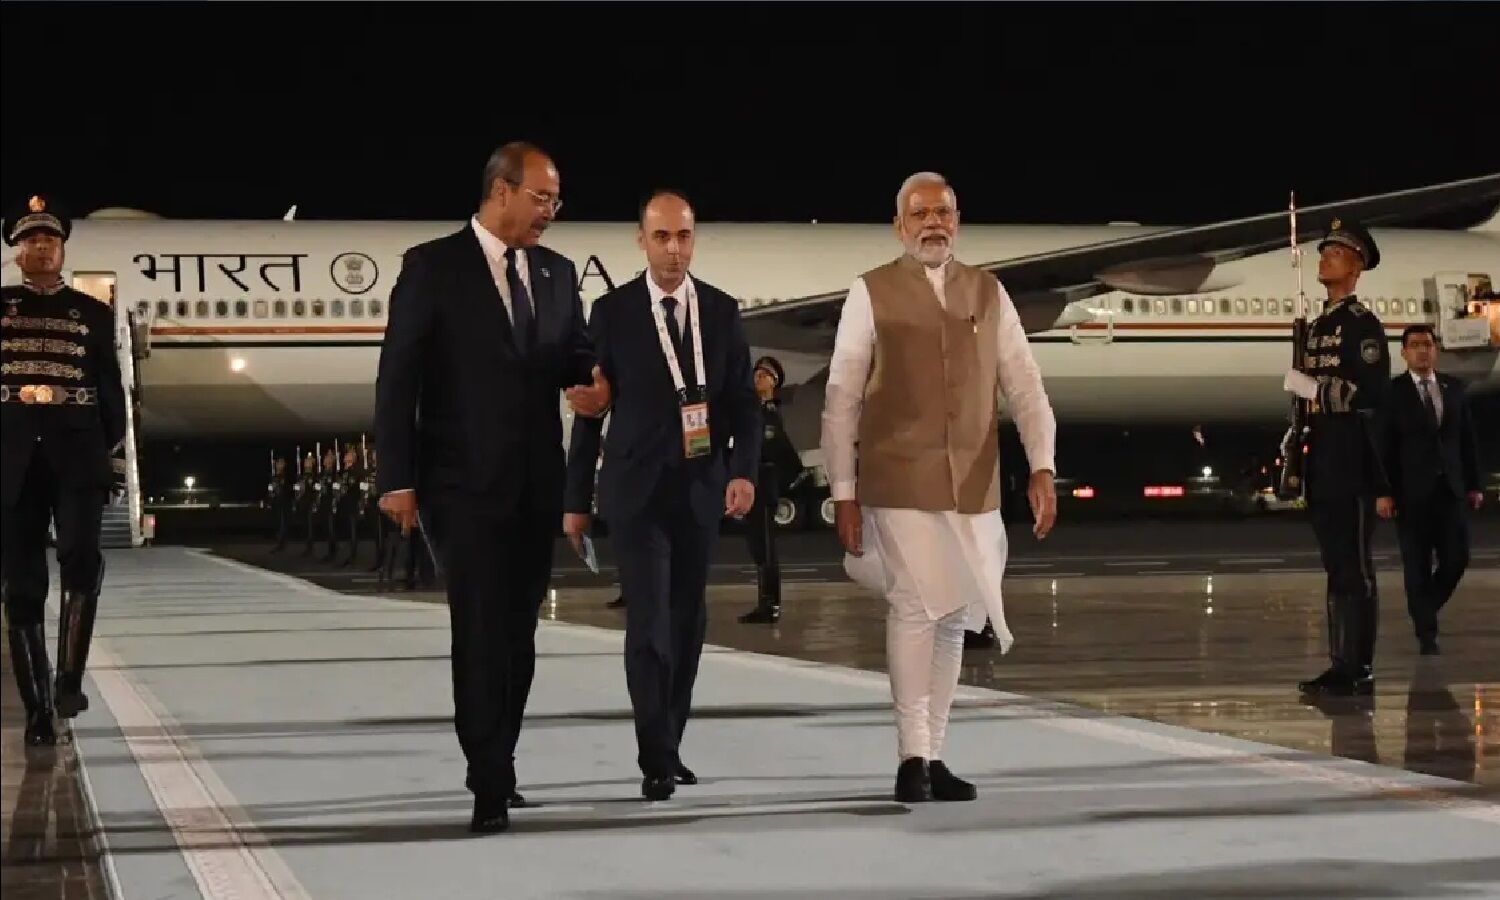 PM Modi was the last leader to reach the SCO summit, what was the diplomatic reason behind it